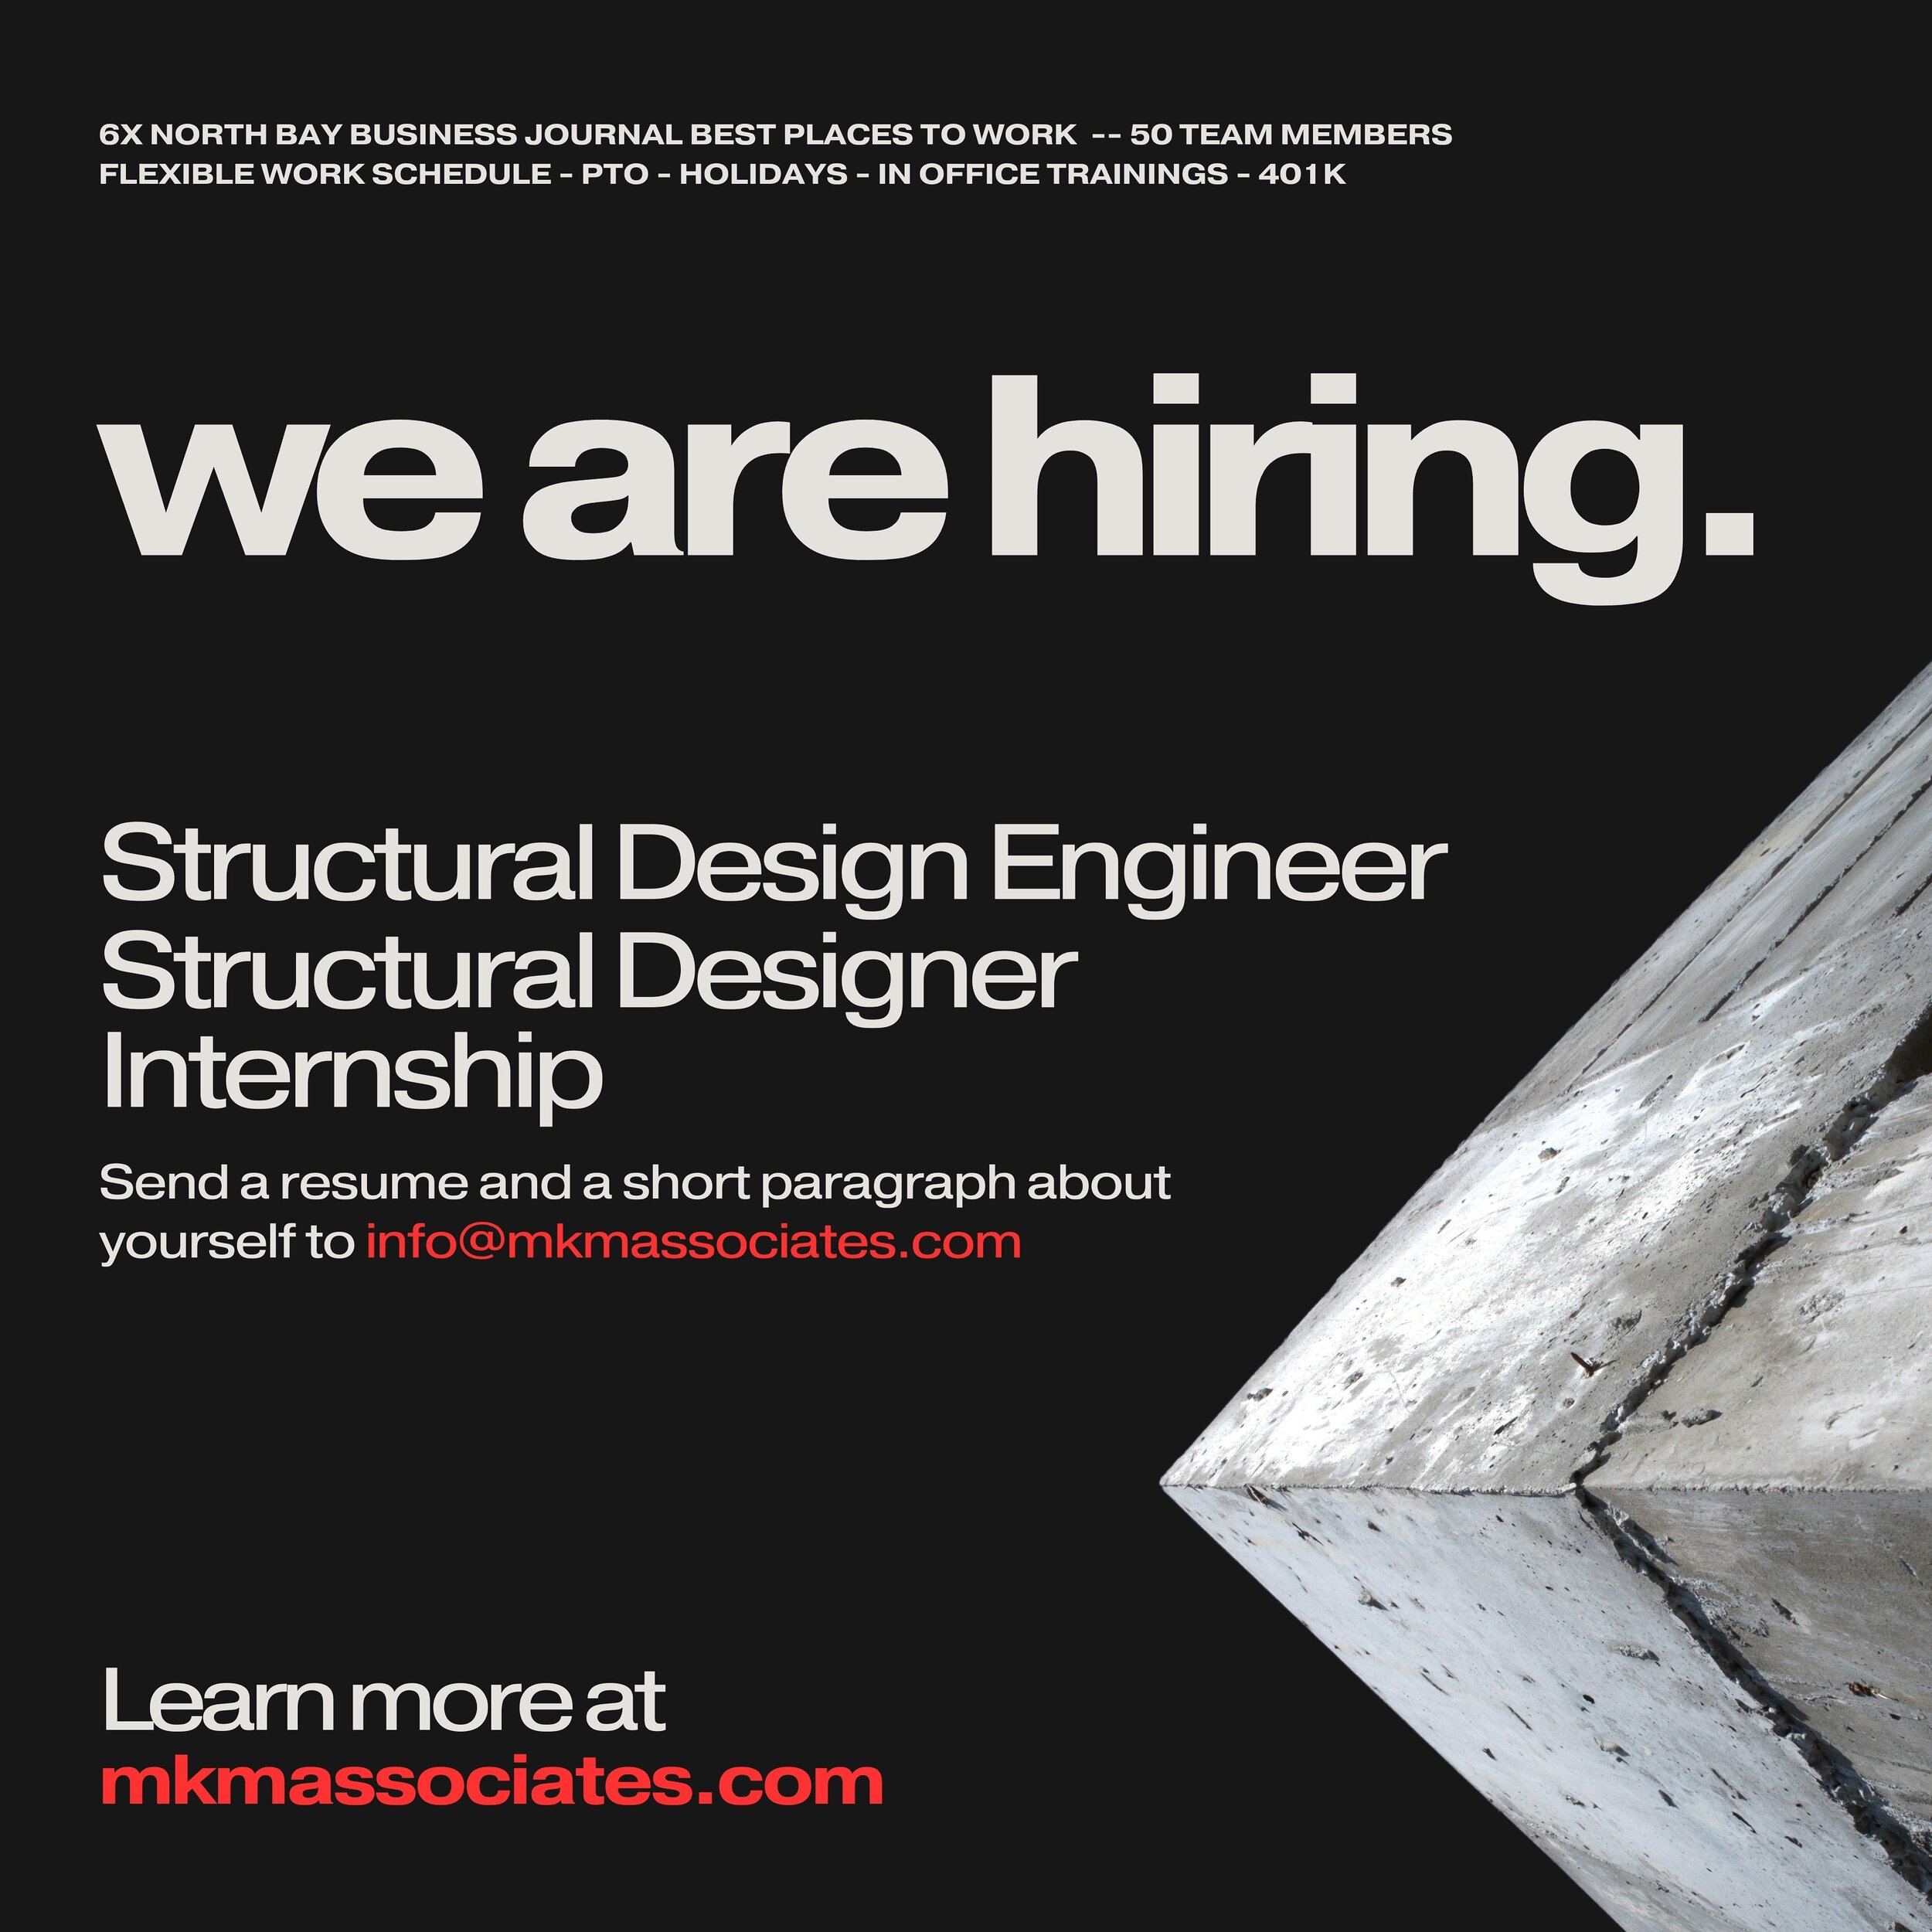 #WeAreHiring and want to hear from you 🤝

Apply via the link in our bio or send us an email 📥

#structuralengineering #structuralengineeringjobs #engineeringjobs #constructionindustry #hiring #northbay #norcal #sonomacounty #sonoma #santarosa #rohn